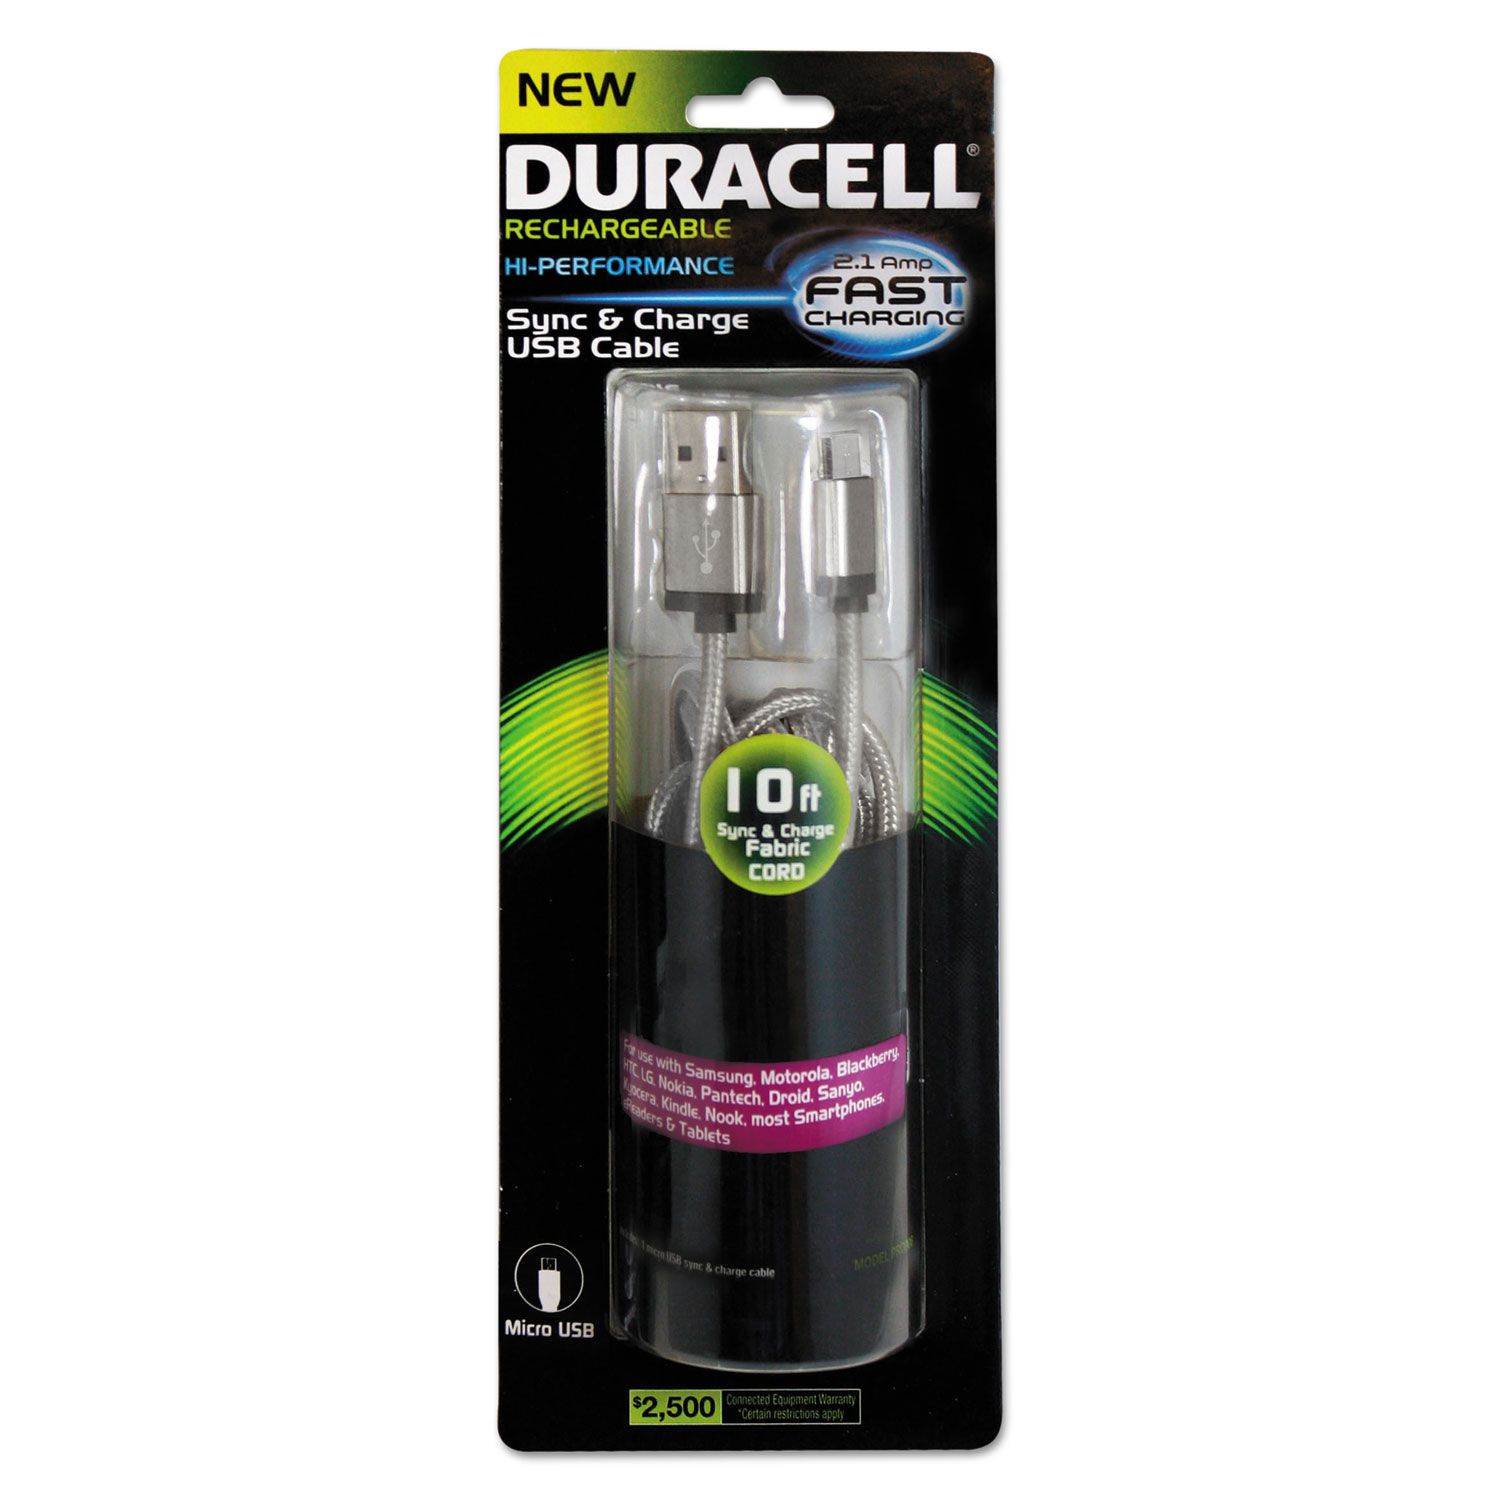  Duracell PRO907 Hi-Performance Sync And Charge Cable, Micro USB, 10ft (ECAPRO907) 